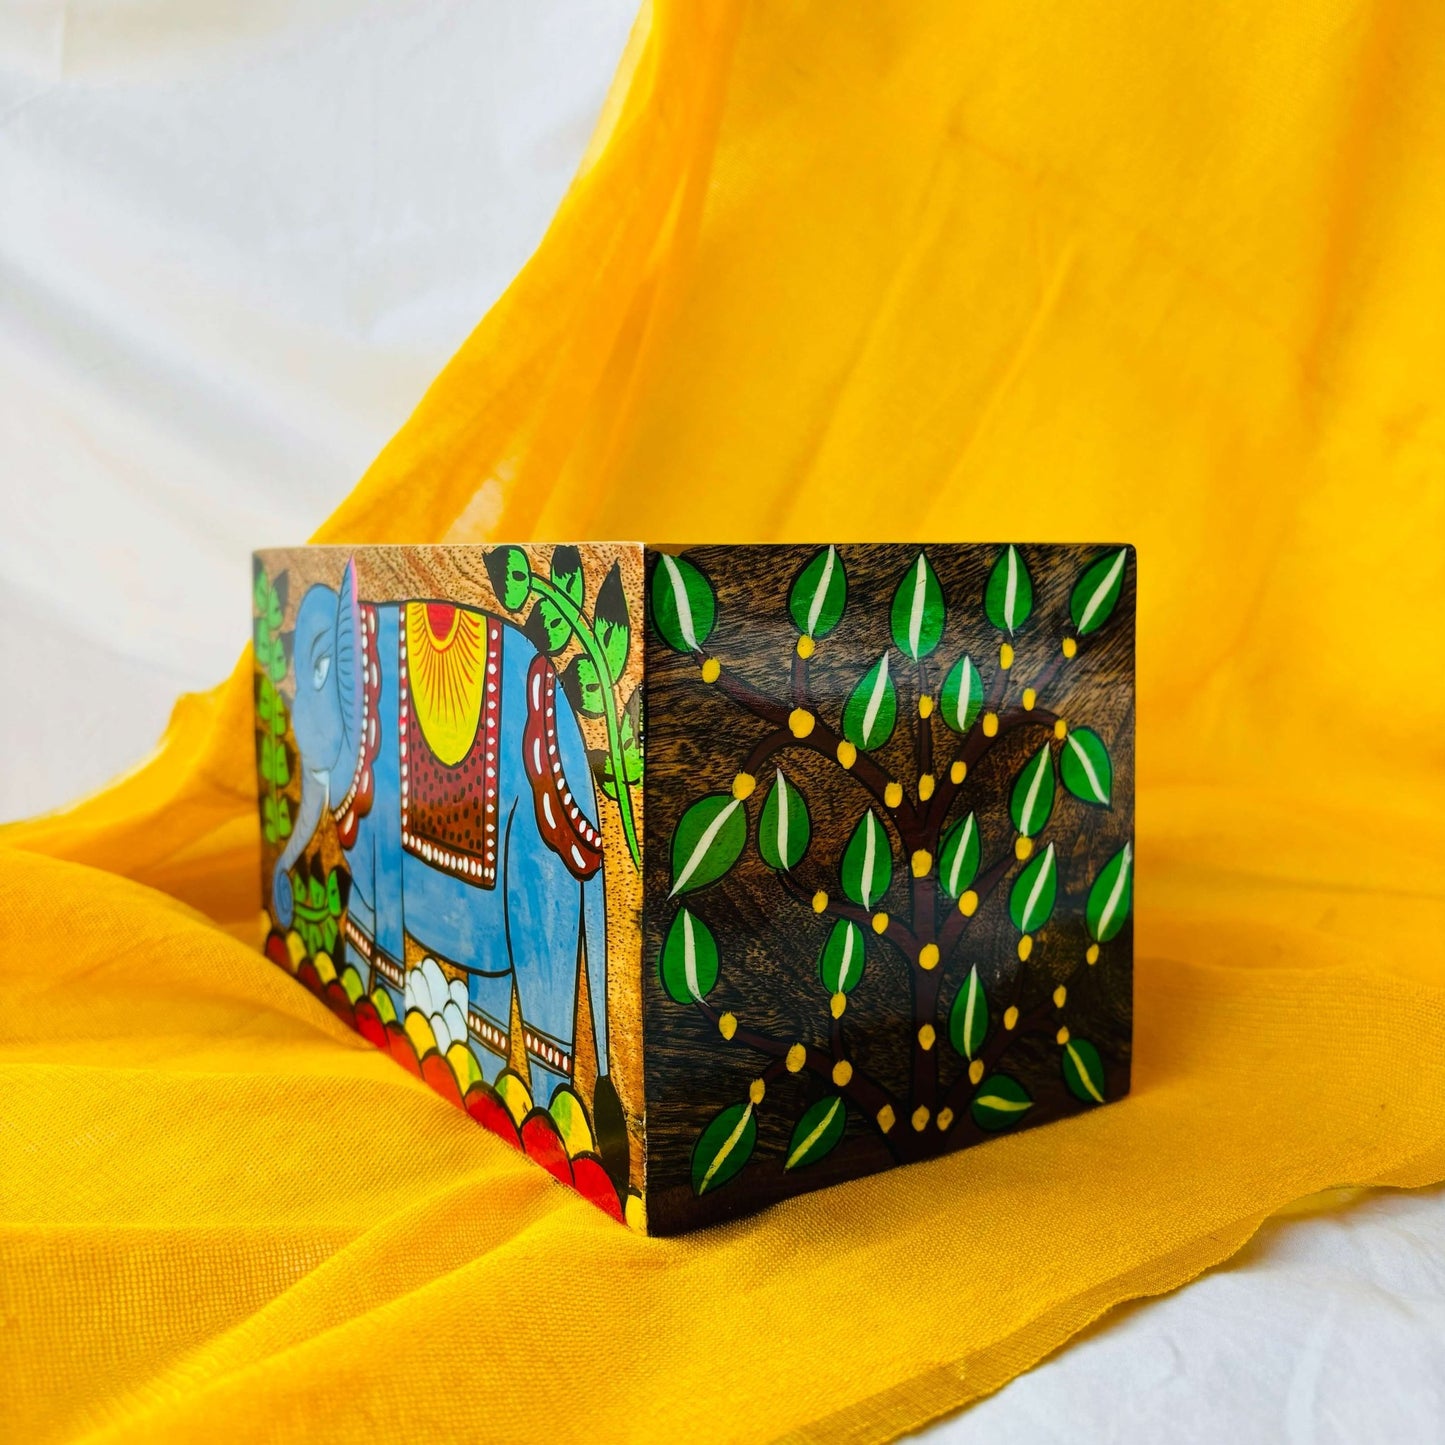 A pure mango wood table organiser or wood cutlery holder, with an elephant, tree branches and leaves hand painted on it, placed at an angle on a yellow background